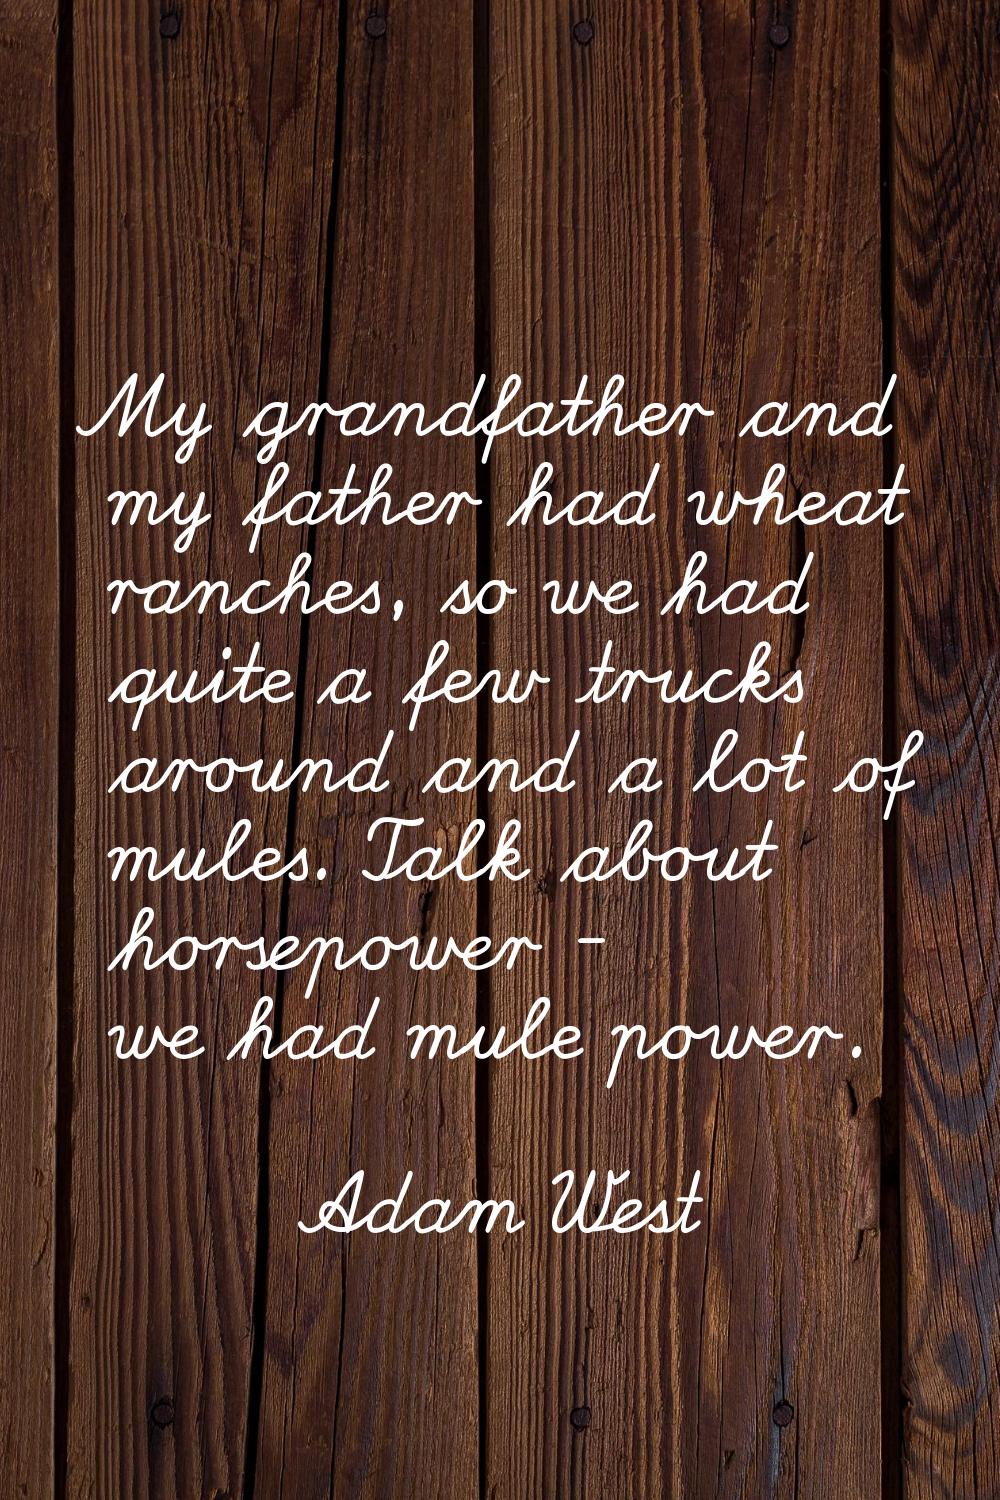 My grandfather and my father had wheat ranches, so we had quite a few trucks around and a lot of mu